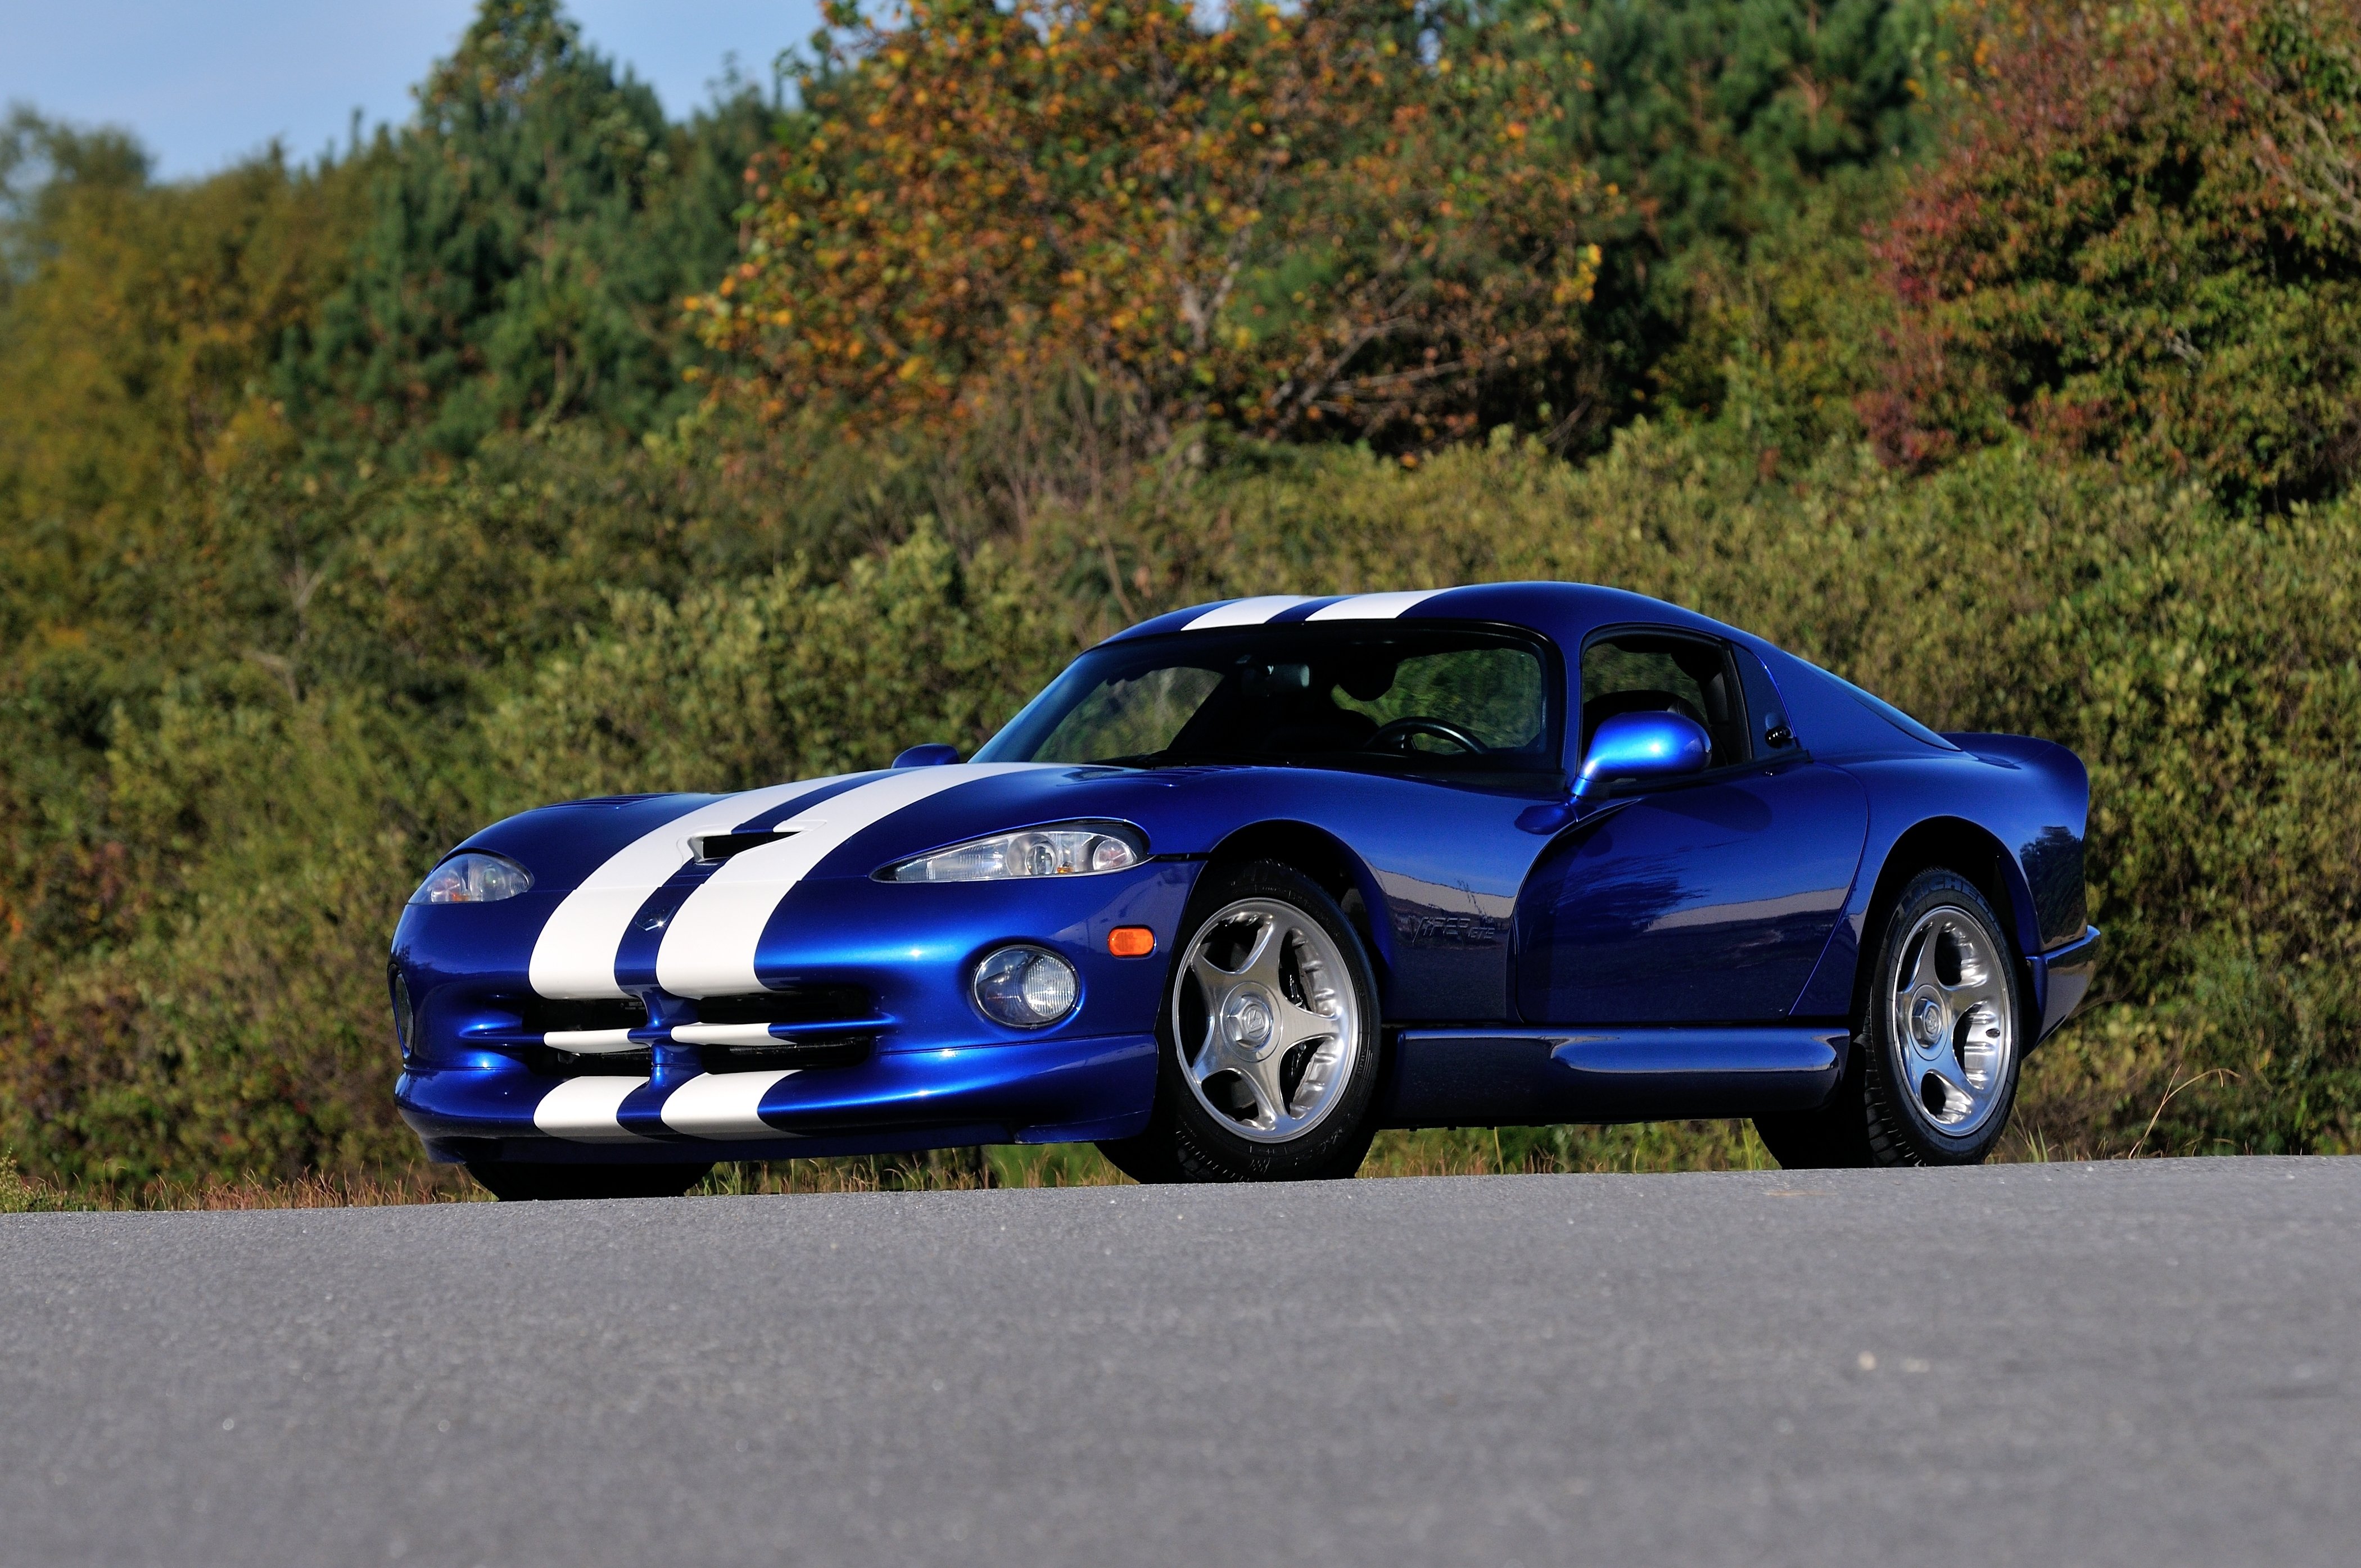 1996, Dodge, Viper, Gts, Coupe, Muscle, Supercar, Usa, 4200x2790 01 Wallpaper